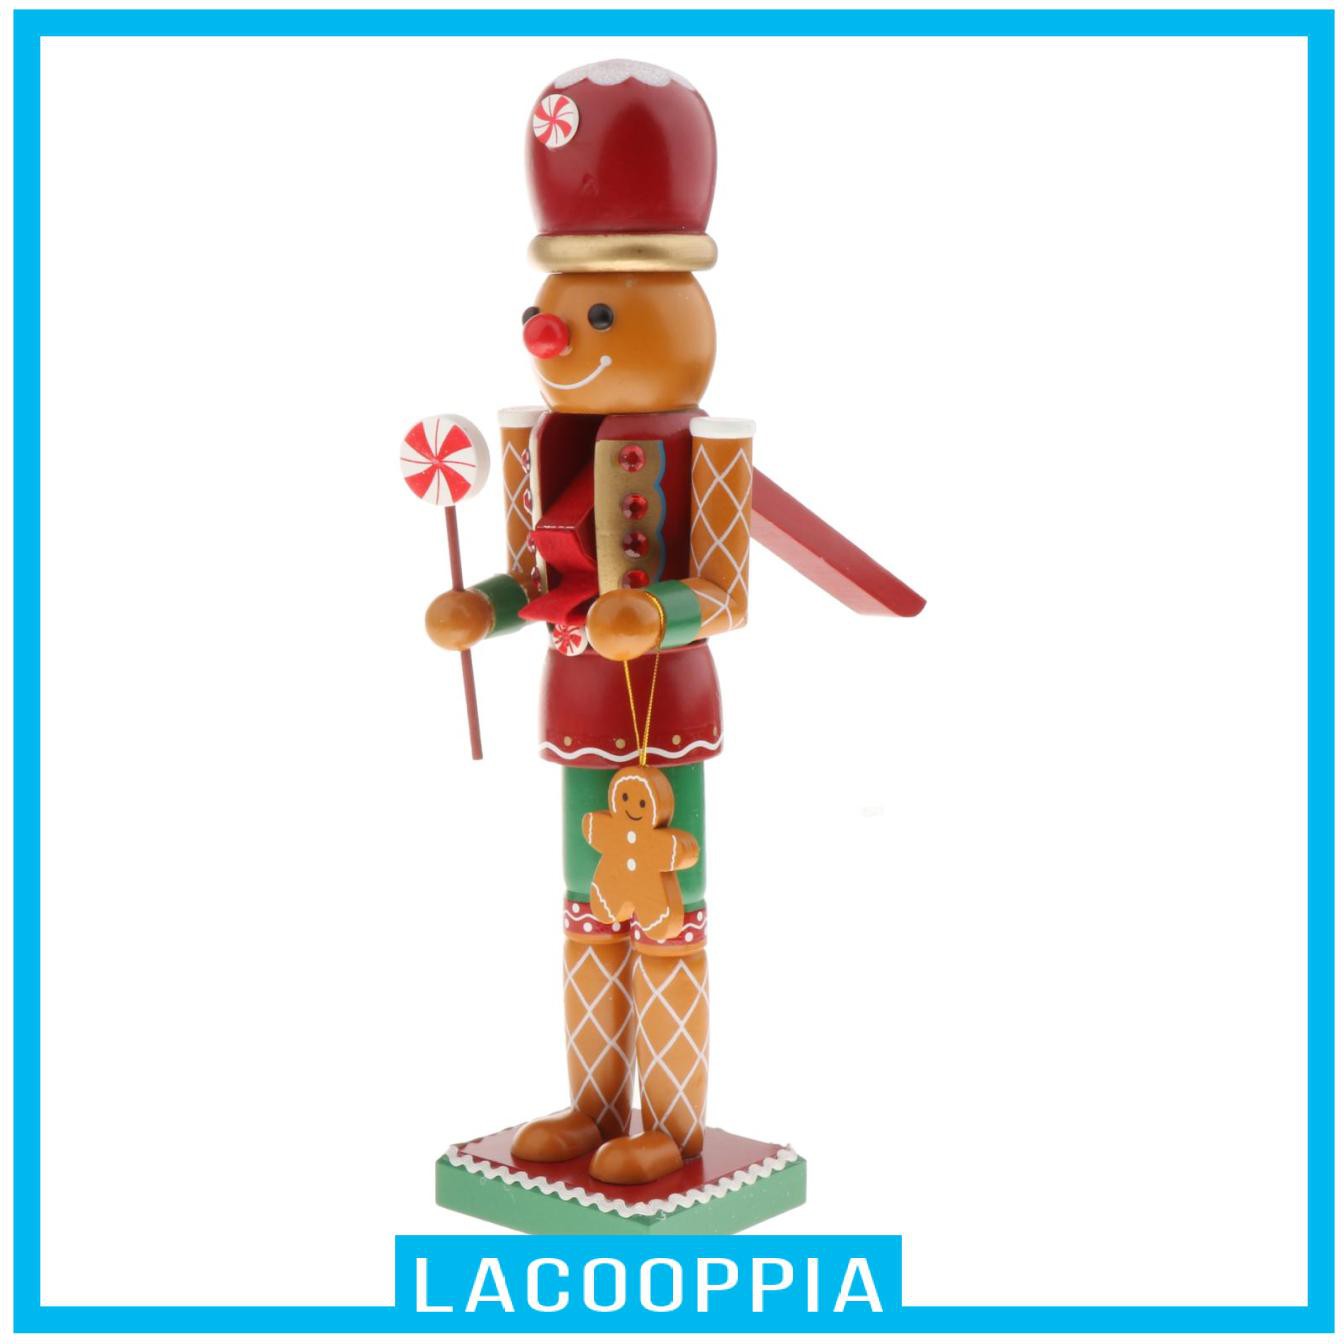 [LACOOPPIA] Wood Nut Soldier Christmas Nut  Puppet Figurine Cake Doll Standing